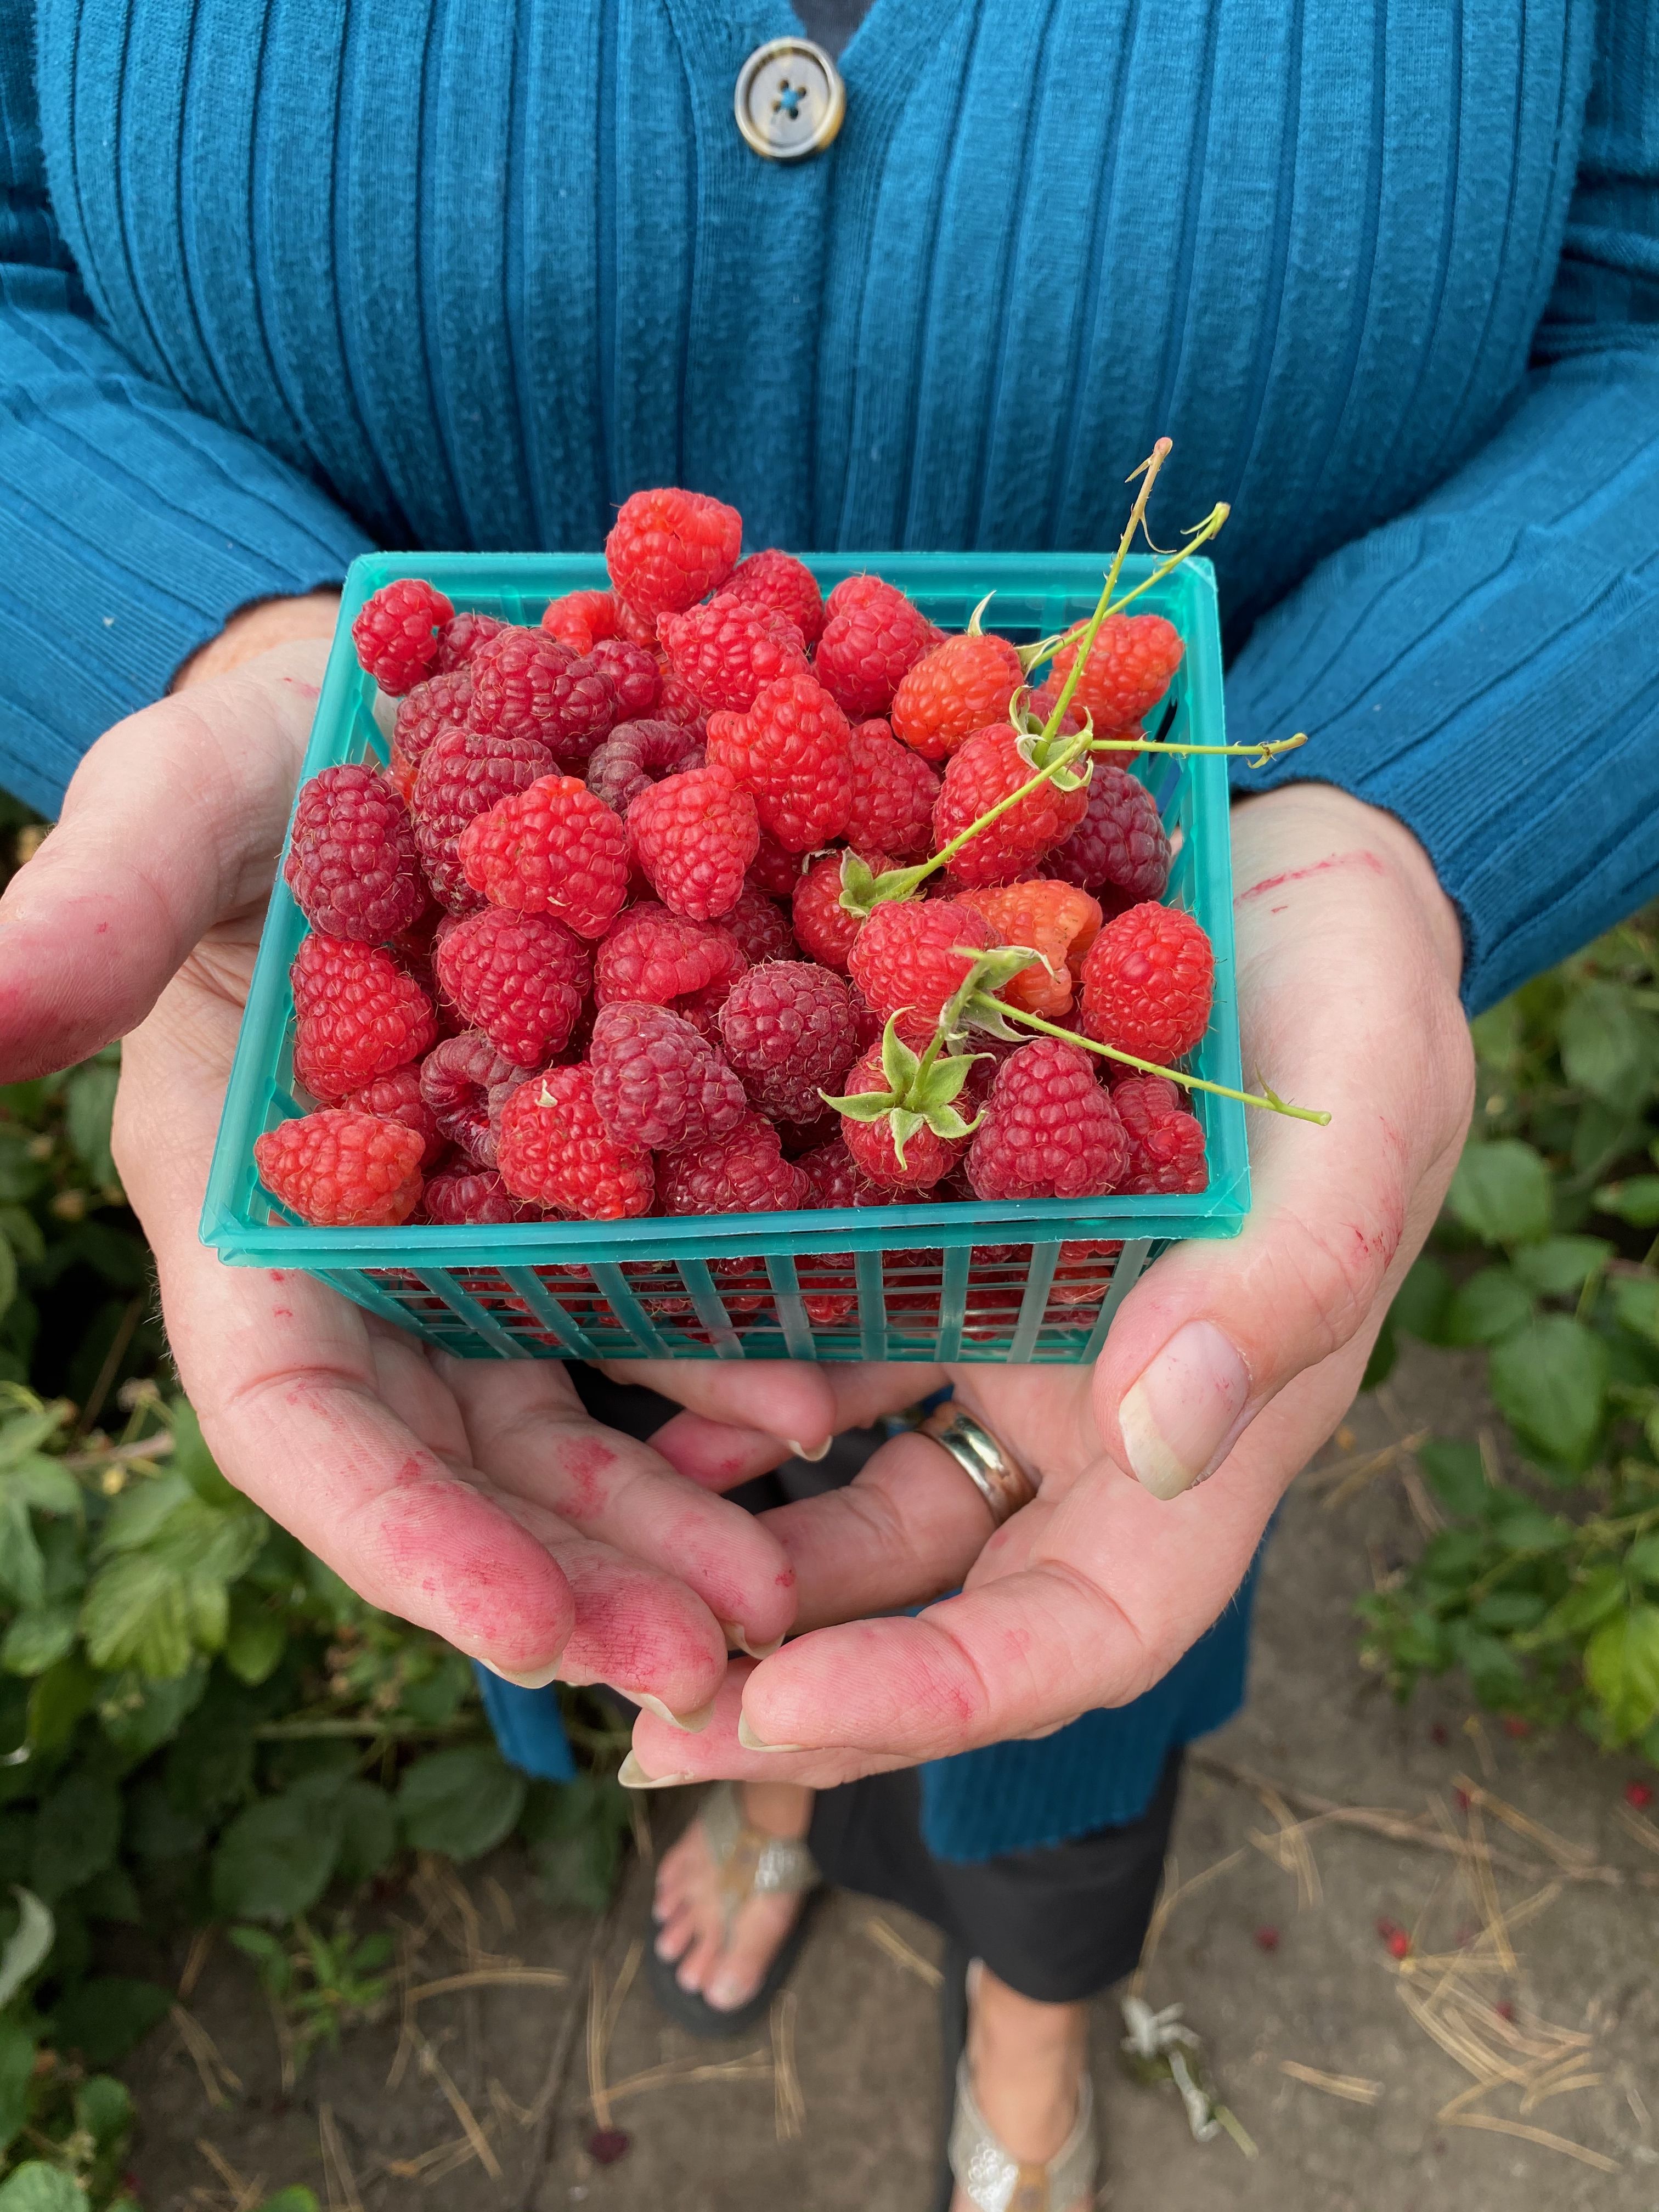 holding a small basket of raspberries